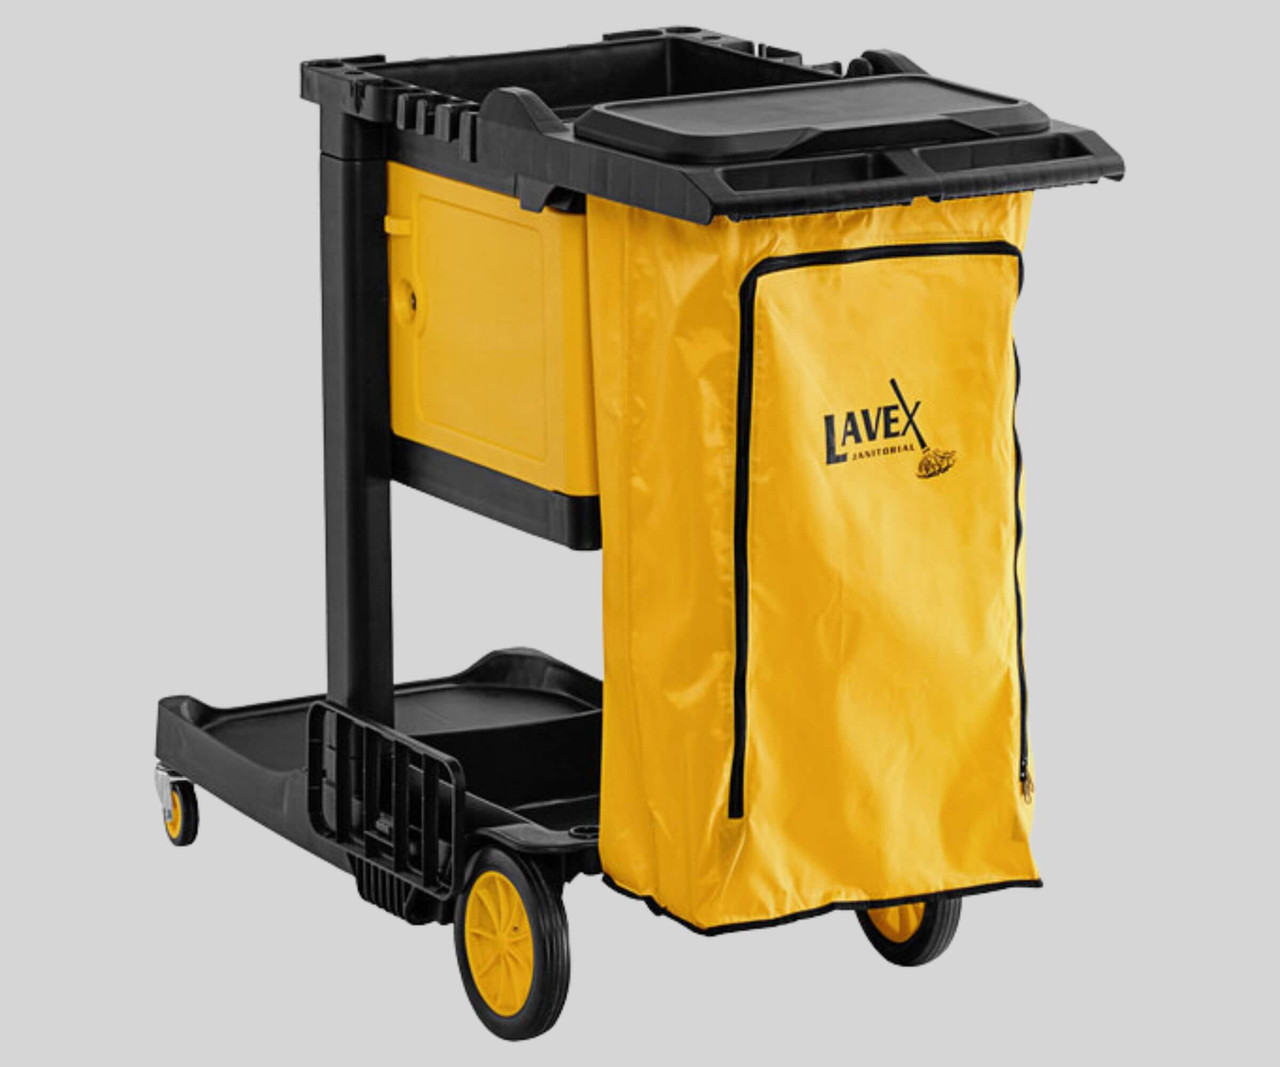 CP Janitorial Premium 3-Shelf Janitor Cart Kit with Yellow Zippered Bag, Lid, and Single Lock Box | Comprehensive Cleaning Solution with Enhanced Security- Chicken Pieces